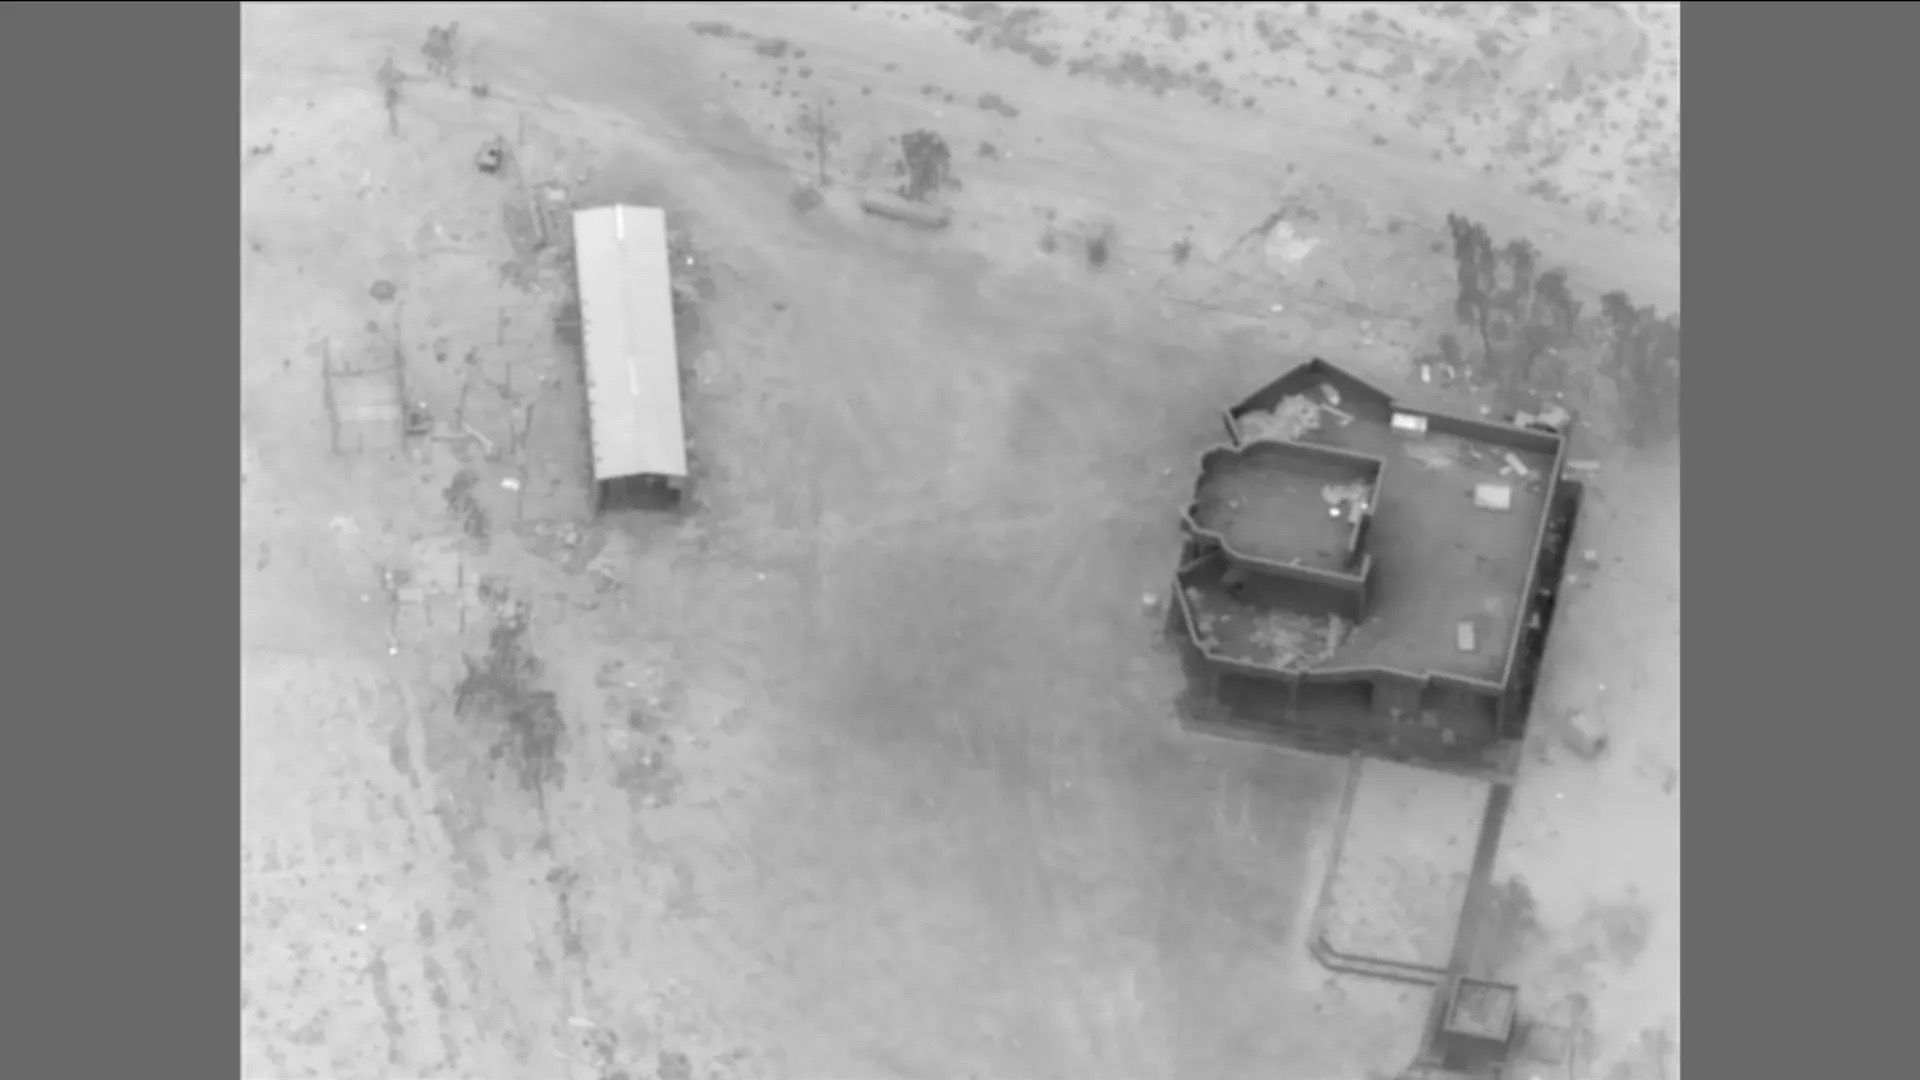 A drone image shows an Iranian militia site struck by the U.S. military along the Iraq-Syria border.